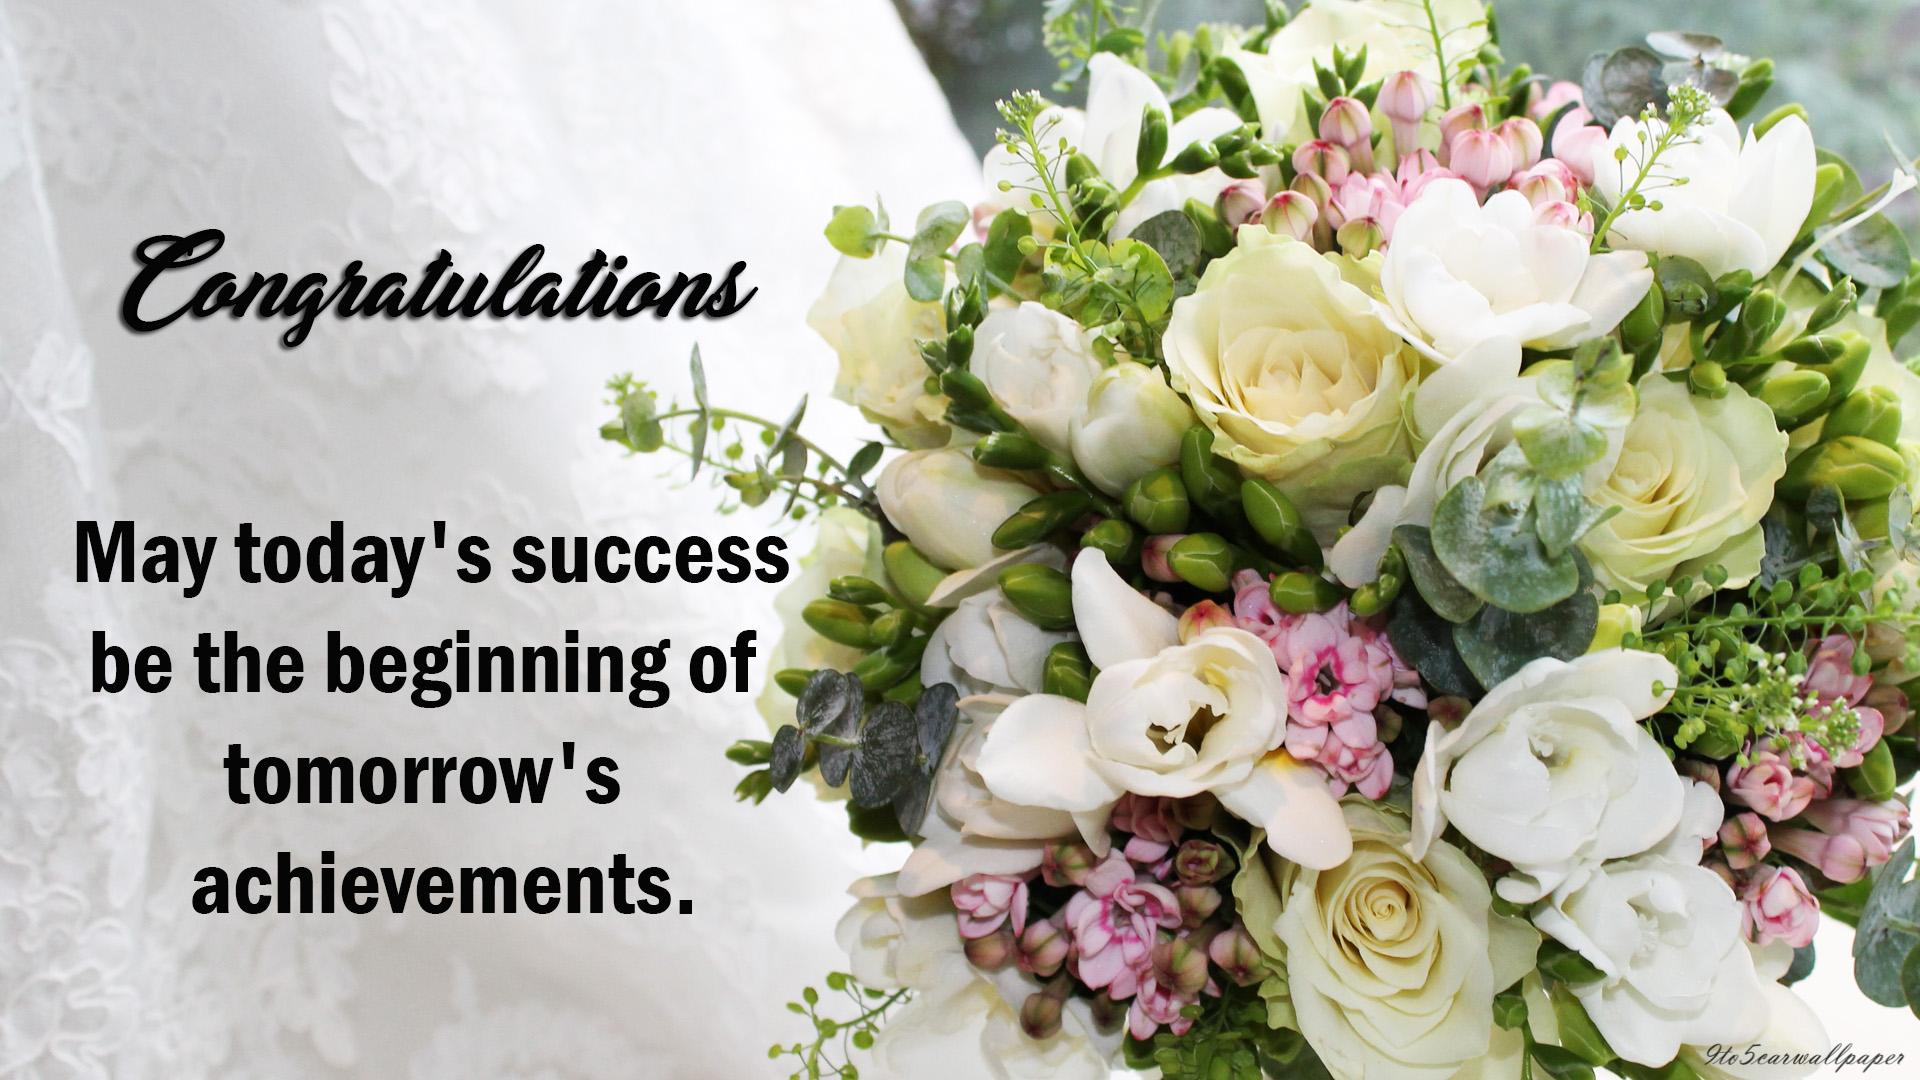 Lovely Congratulations Image & Wishes 2018